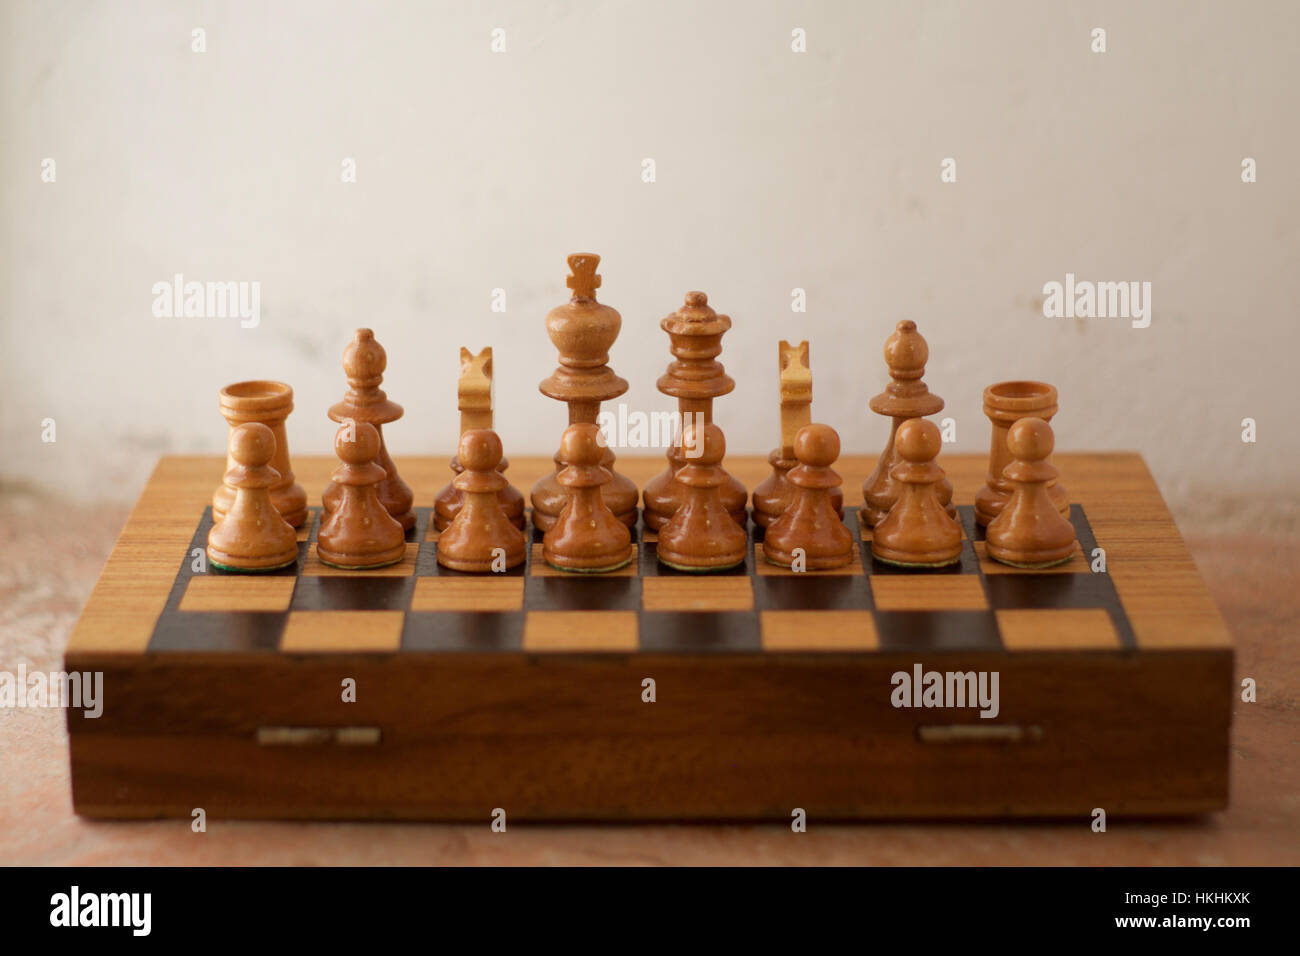 A half chess board with only the white chess pieces arranged facing the viewer Stock Photo